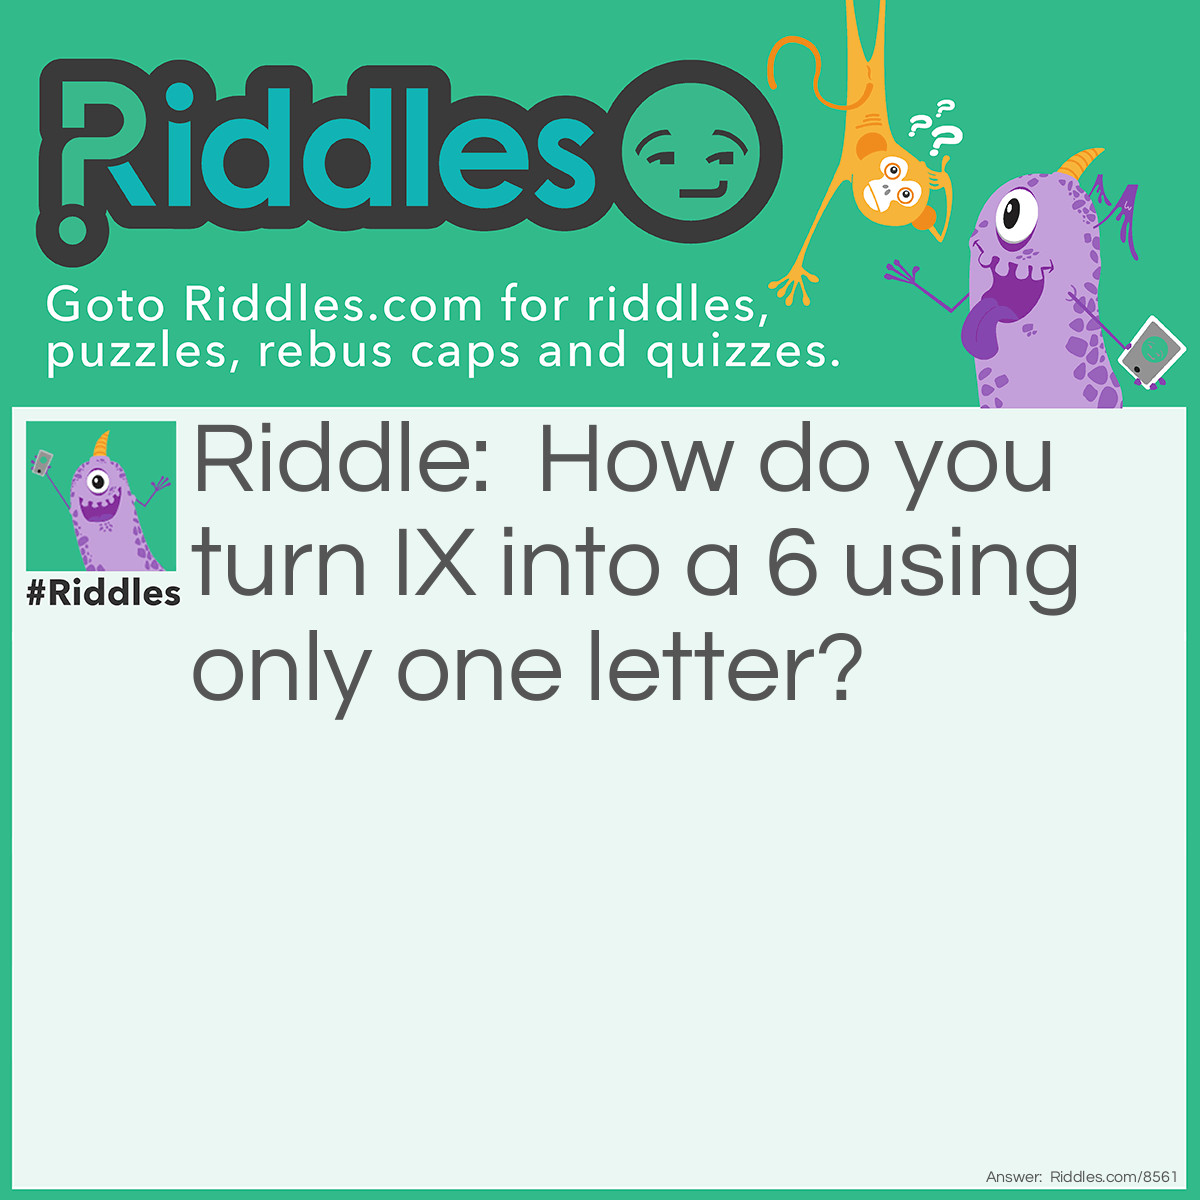 Riddle: How do you turn IX into a 6 using only one letter? Answer: SIX